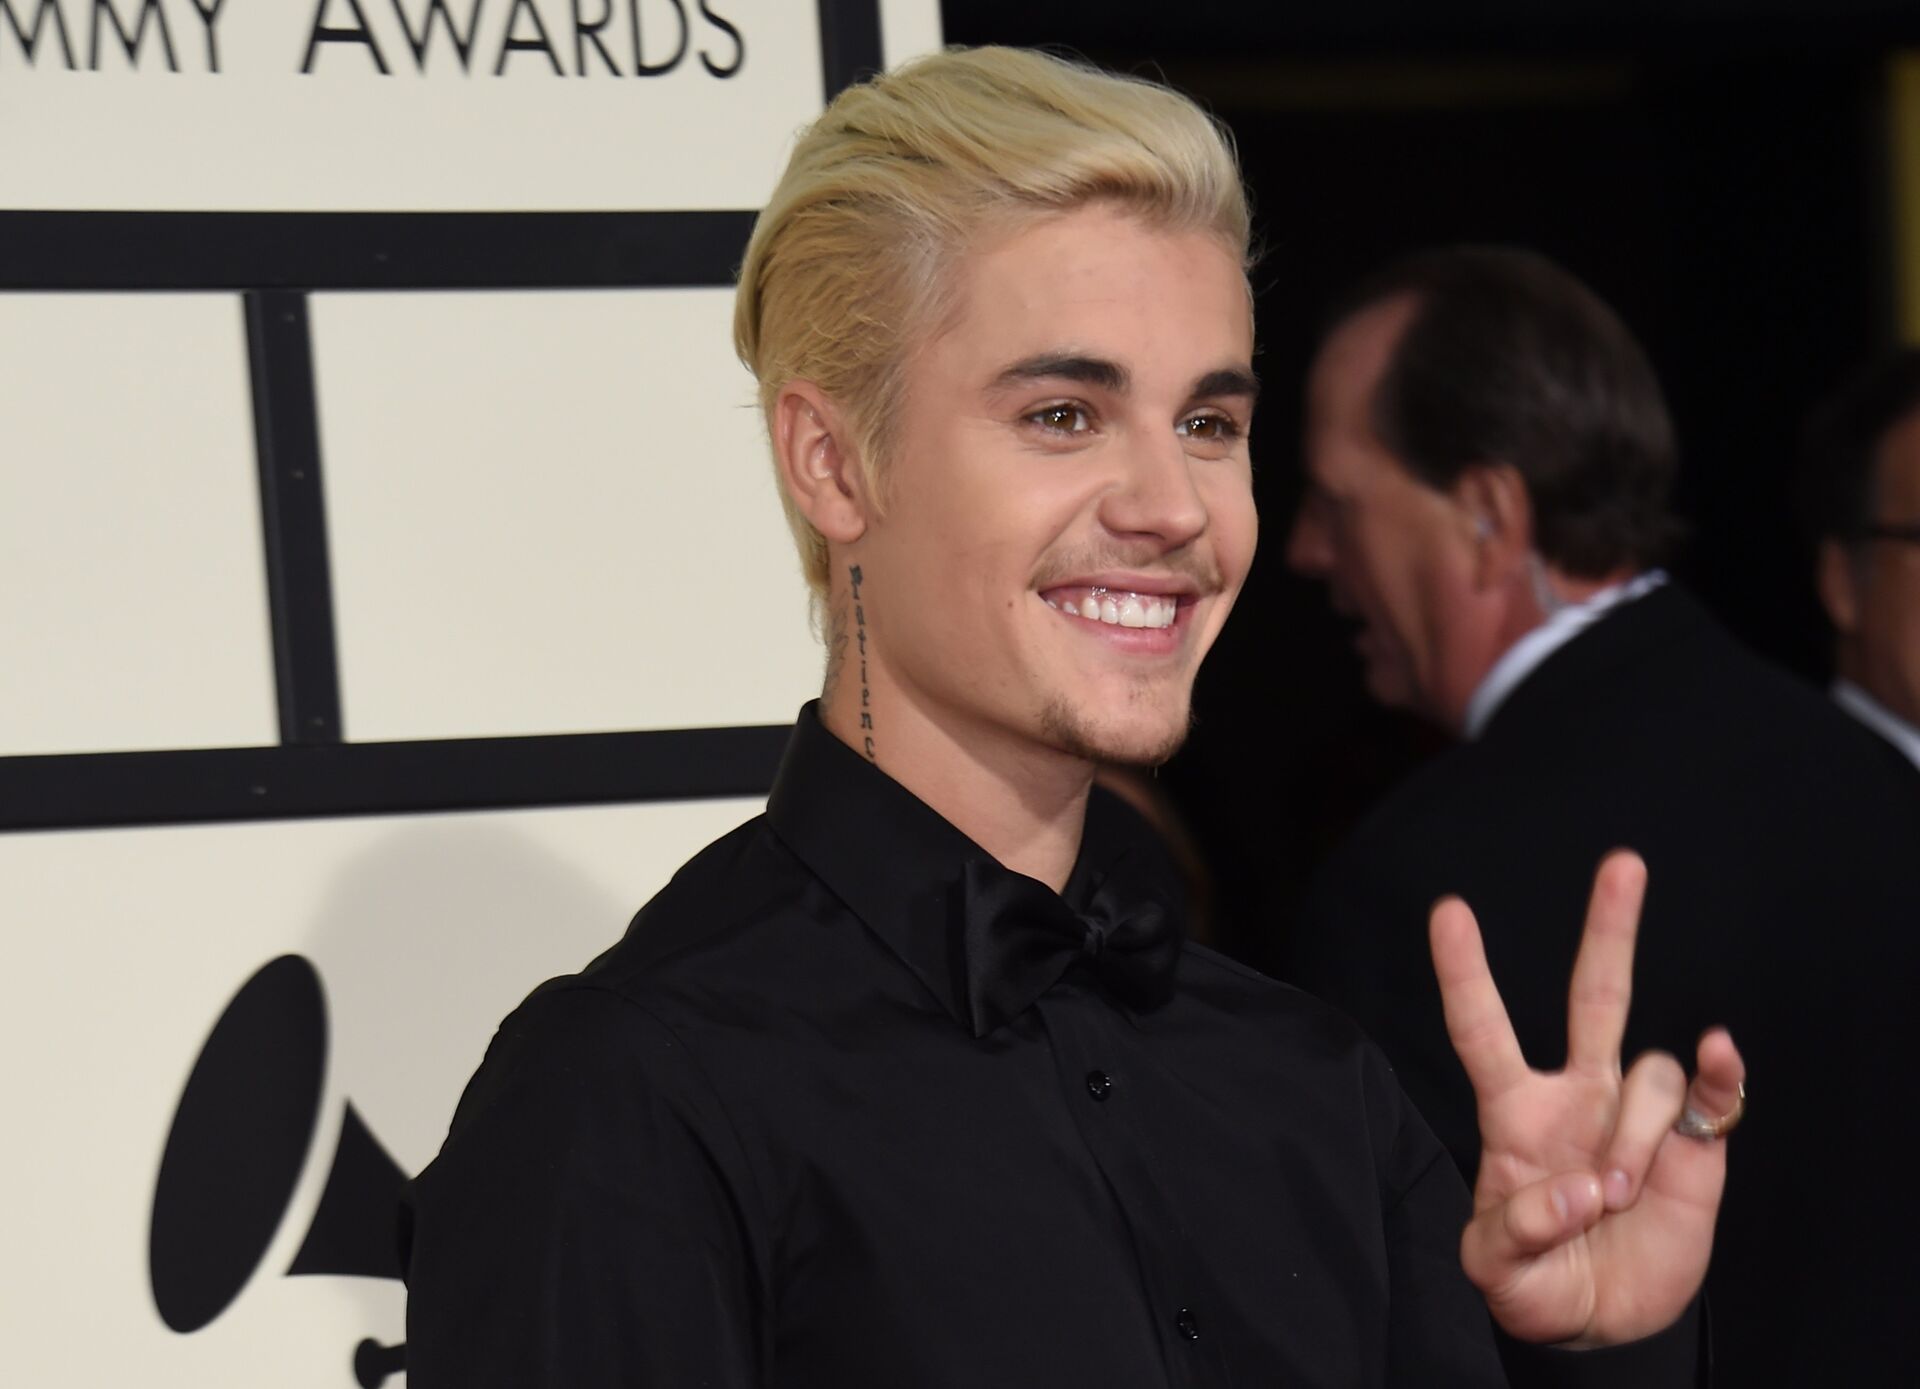 Singer-songwriter Justin Bieber (R) arrives on the red carpet for the 58th Annual Grammy music Awards in Los Angeles February 15, 2016. - Sputnik International, 1920, 15.03.2022